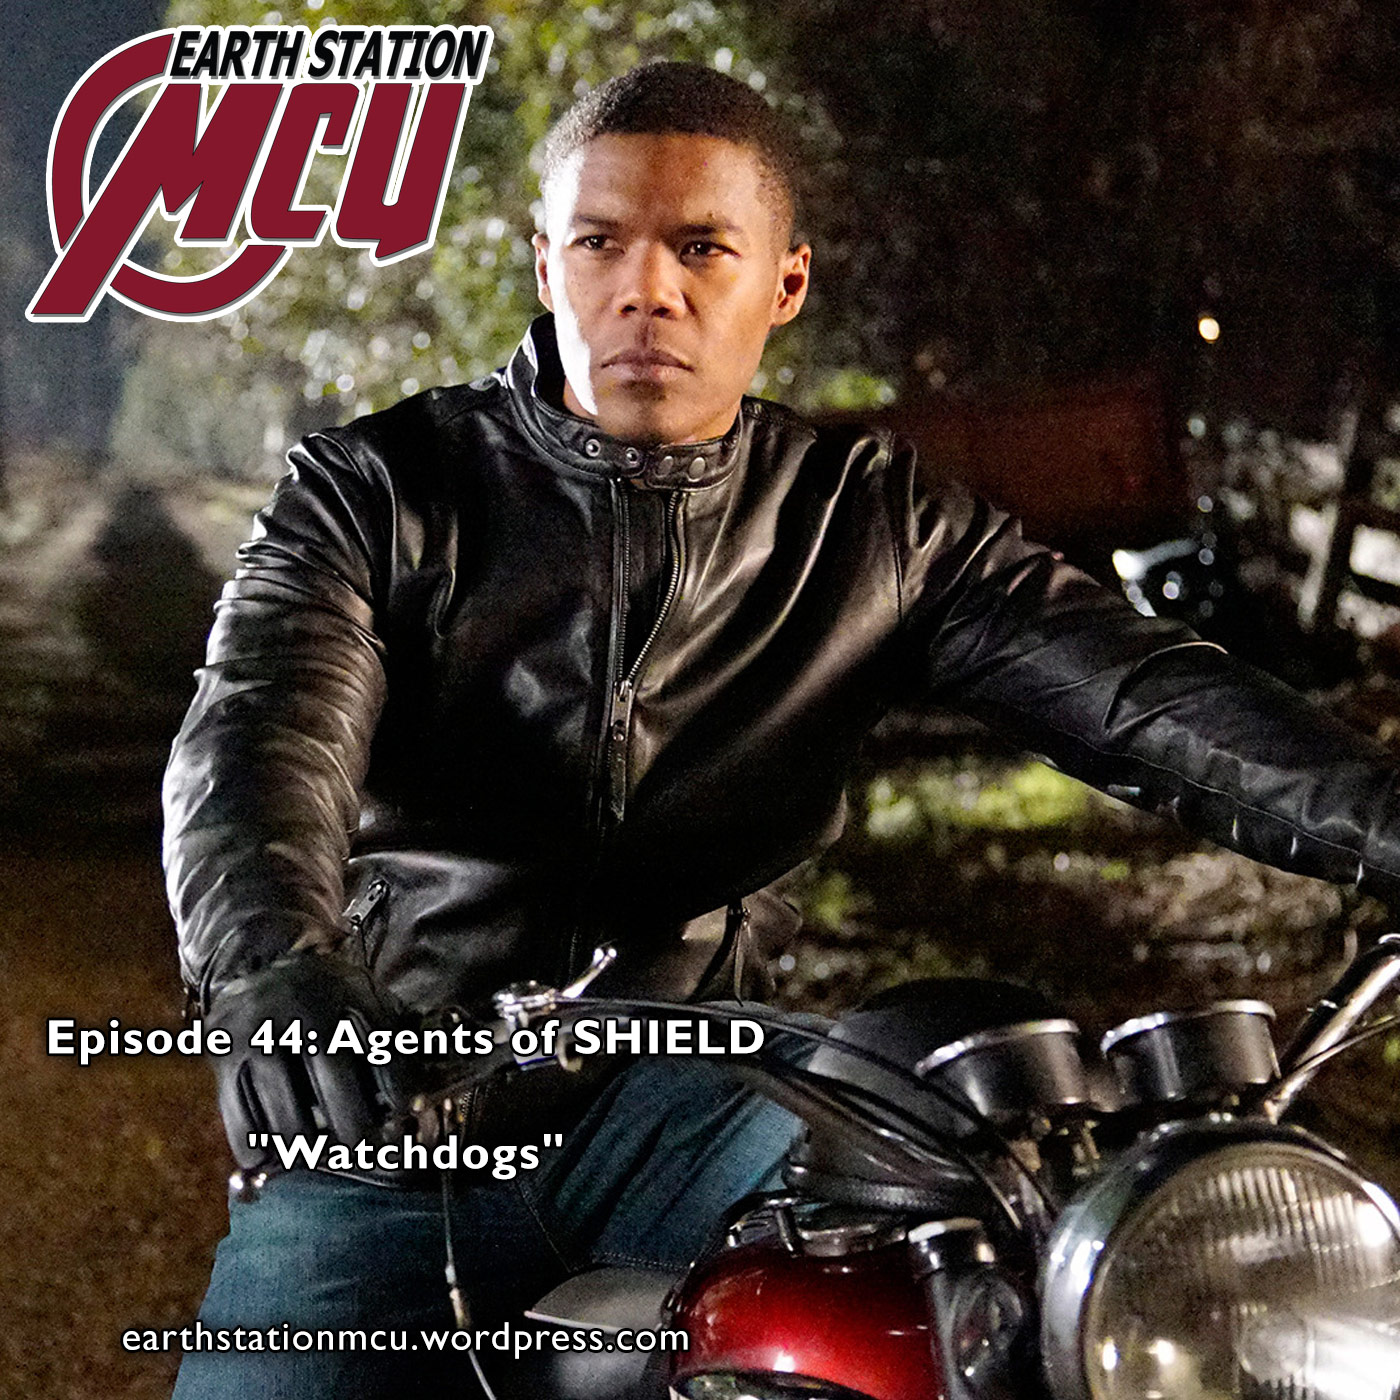 Earth Station MCU: Episode 44 - Agents of SHIELD "Watchdogs" and "Spacetime"